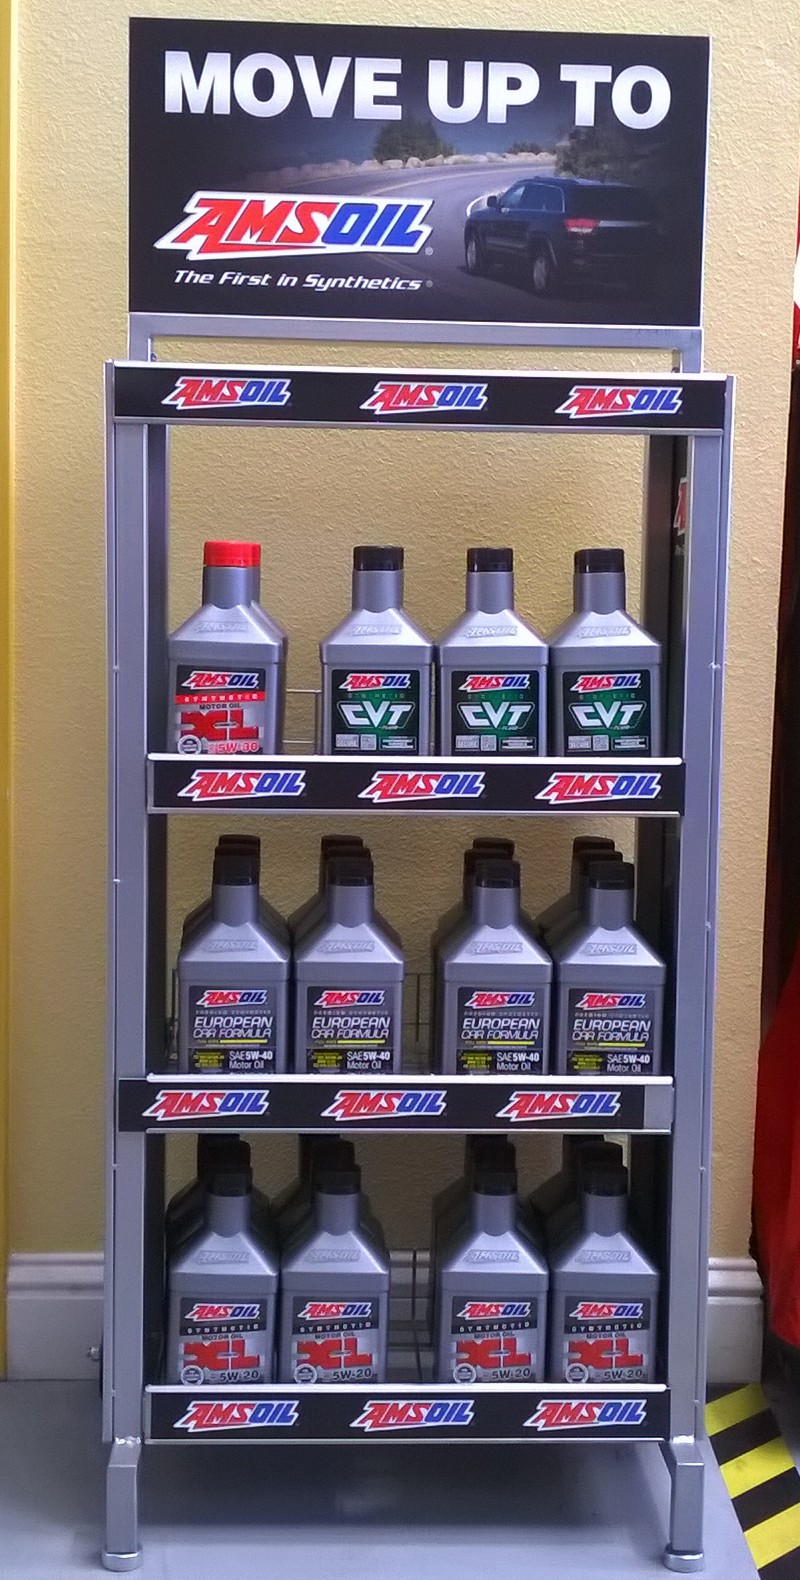 display stand of AMSOIL Motor Oil